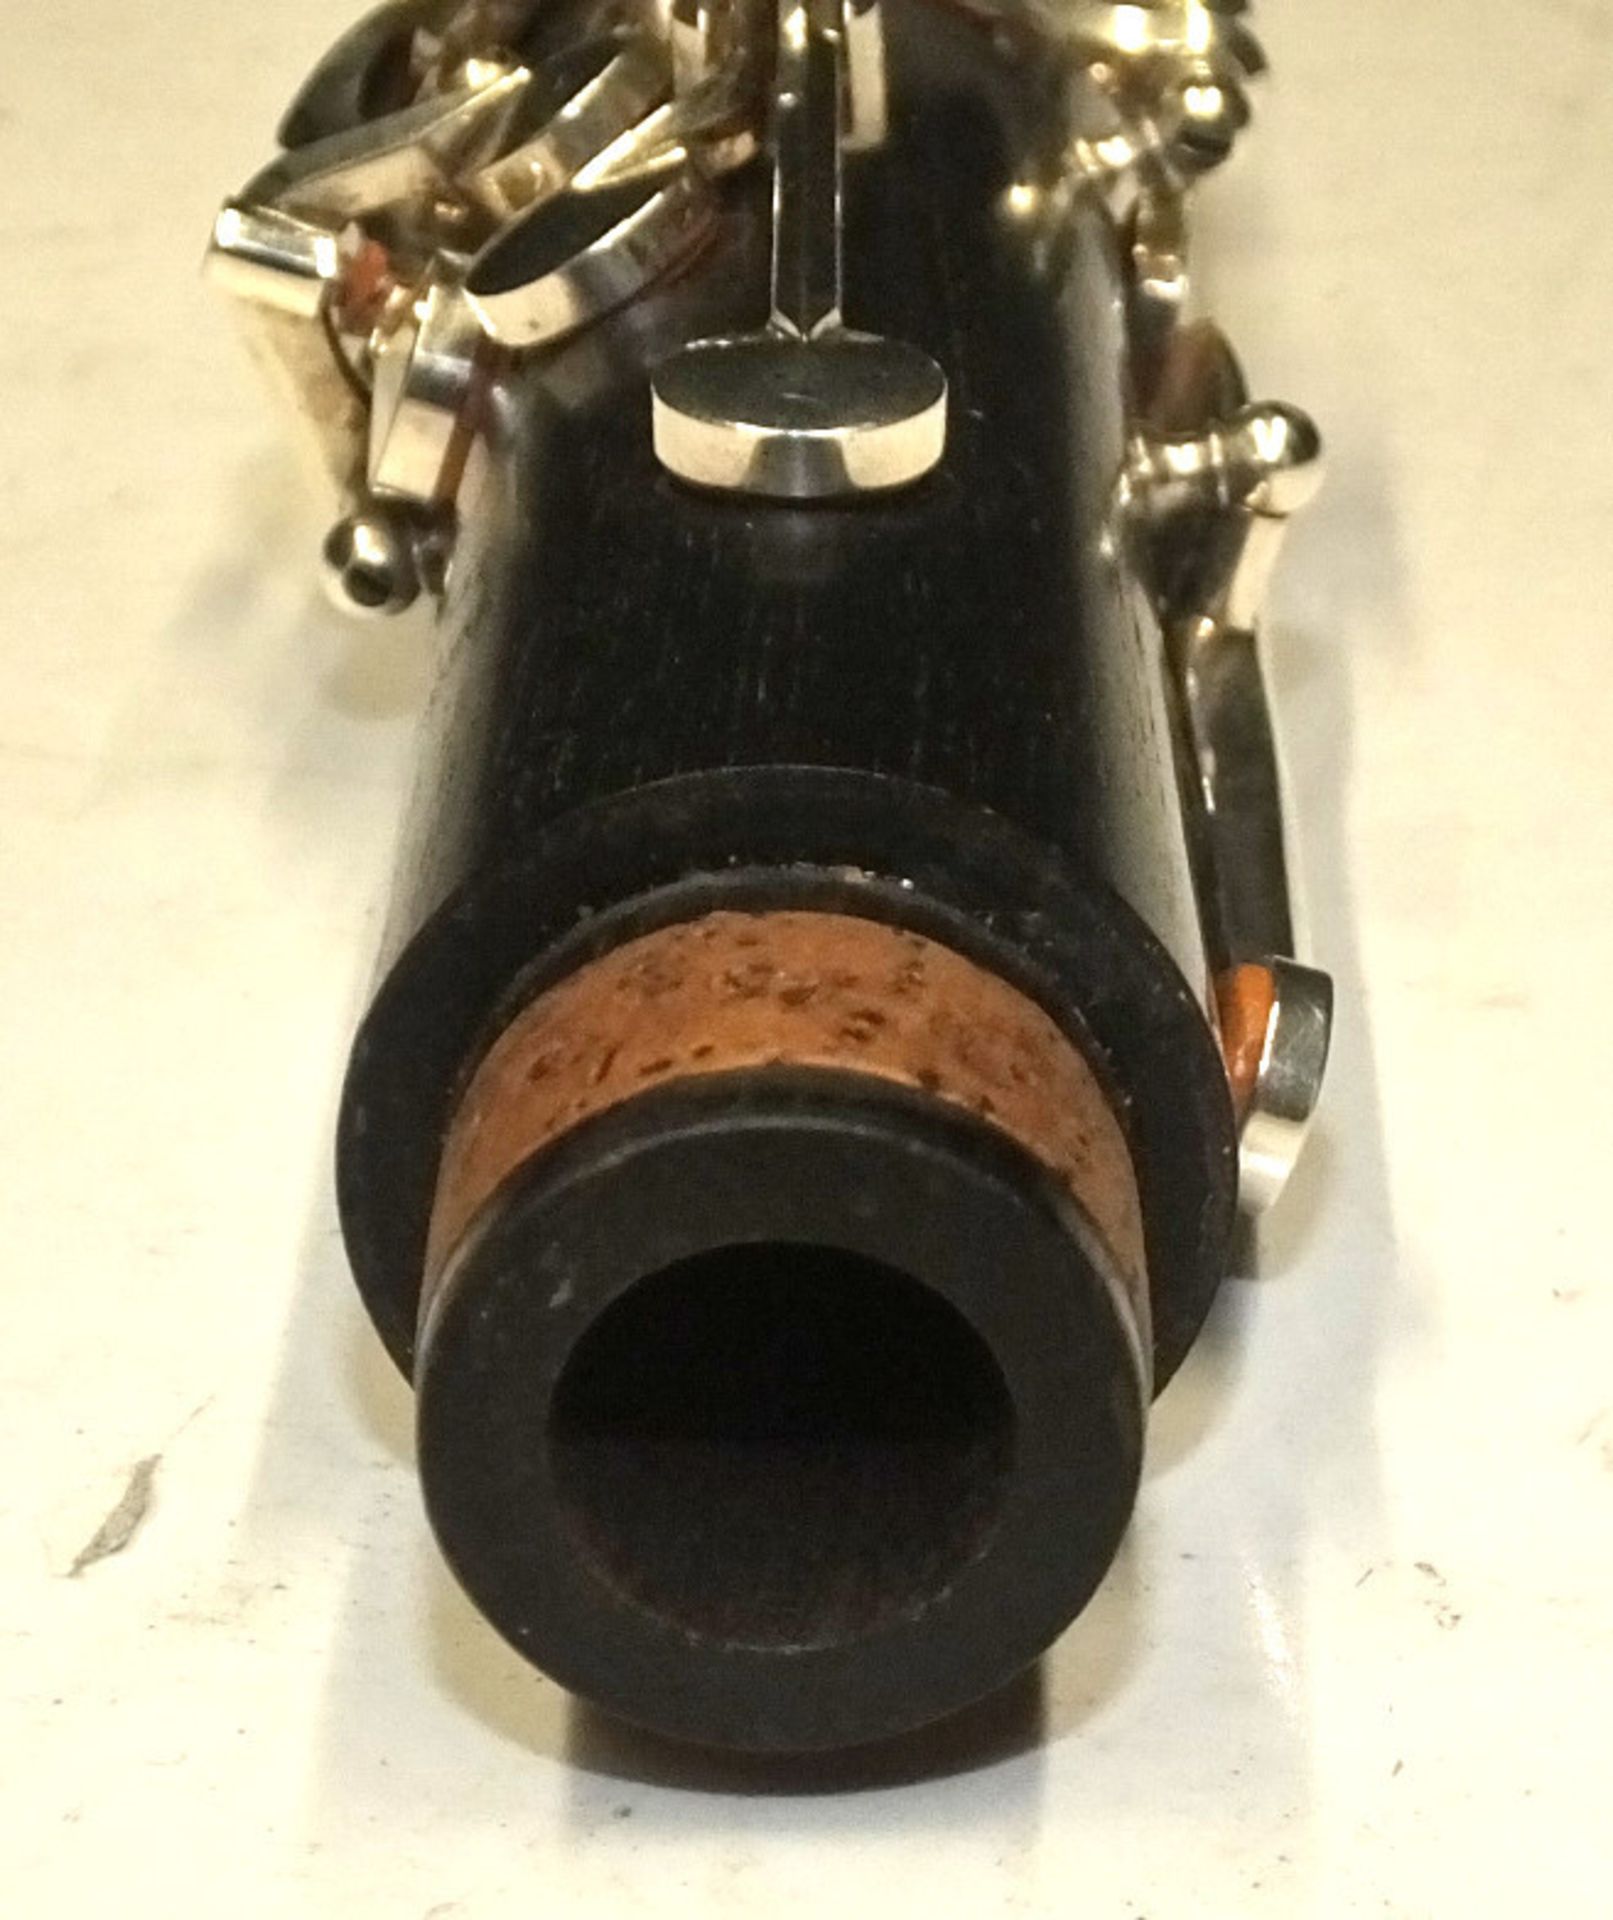 Howarth S2 Clarinet in case - Serial Number - 2153. - Image 6 of 22